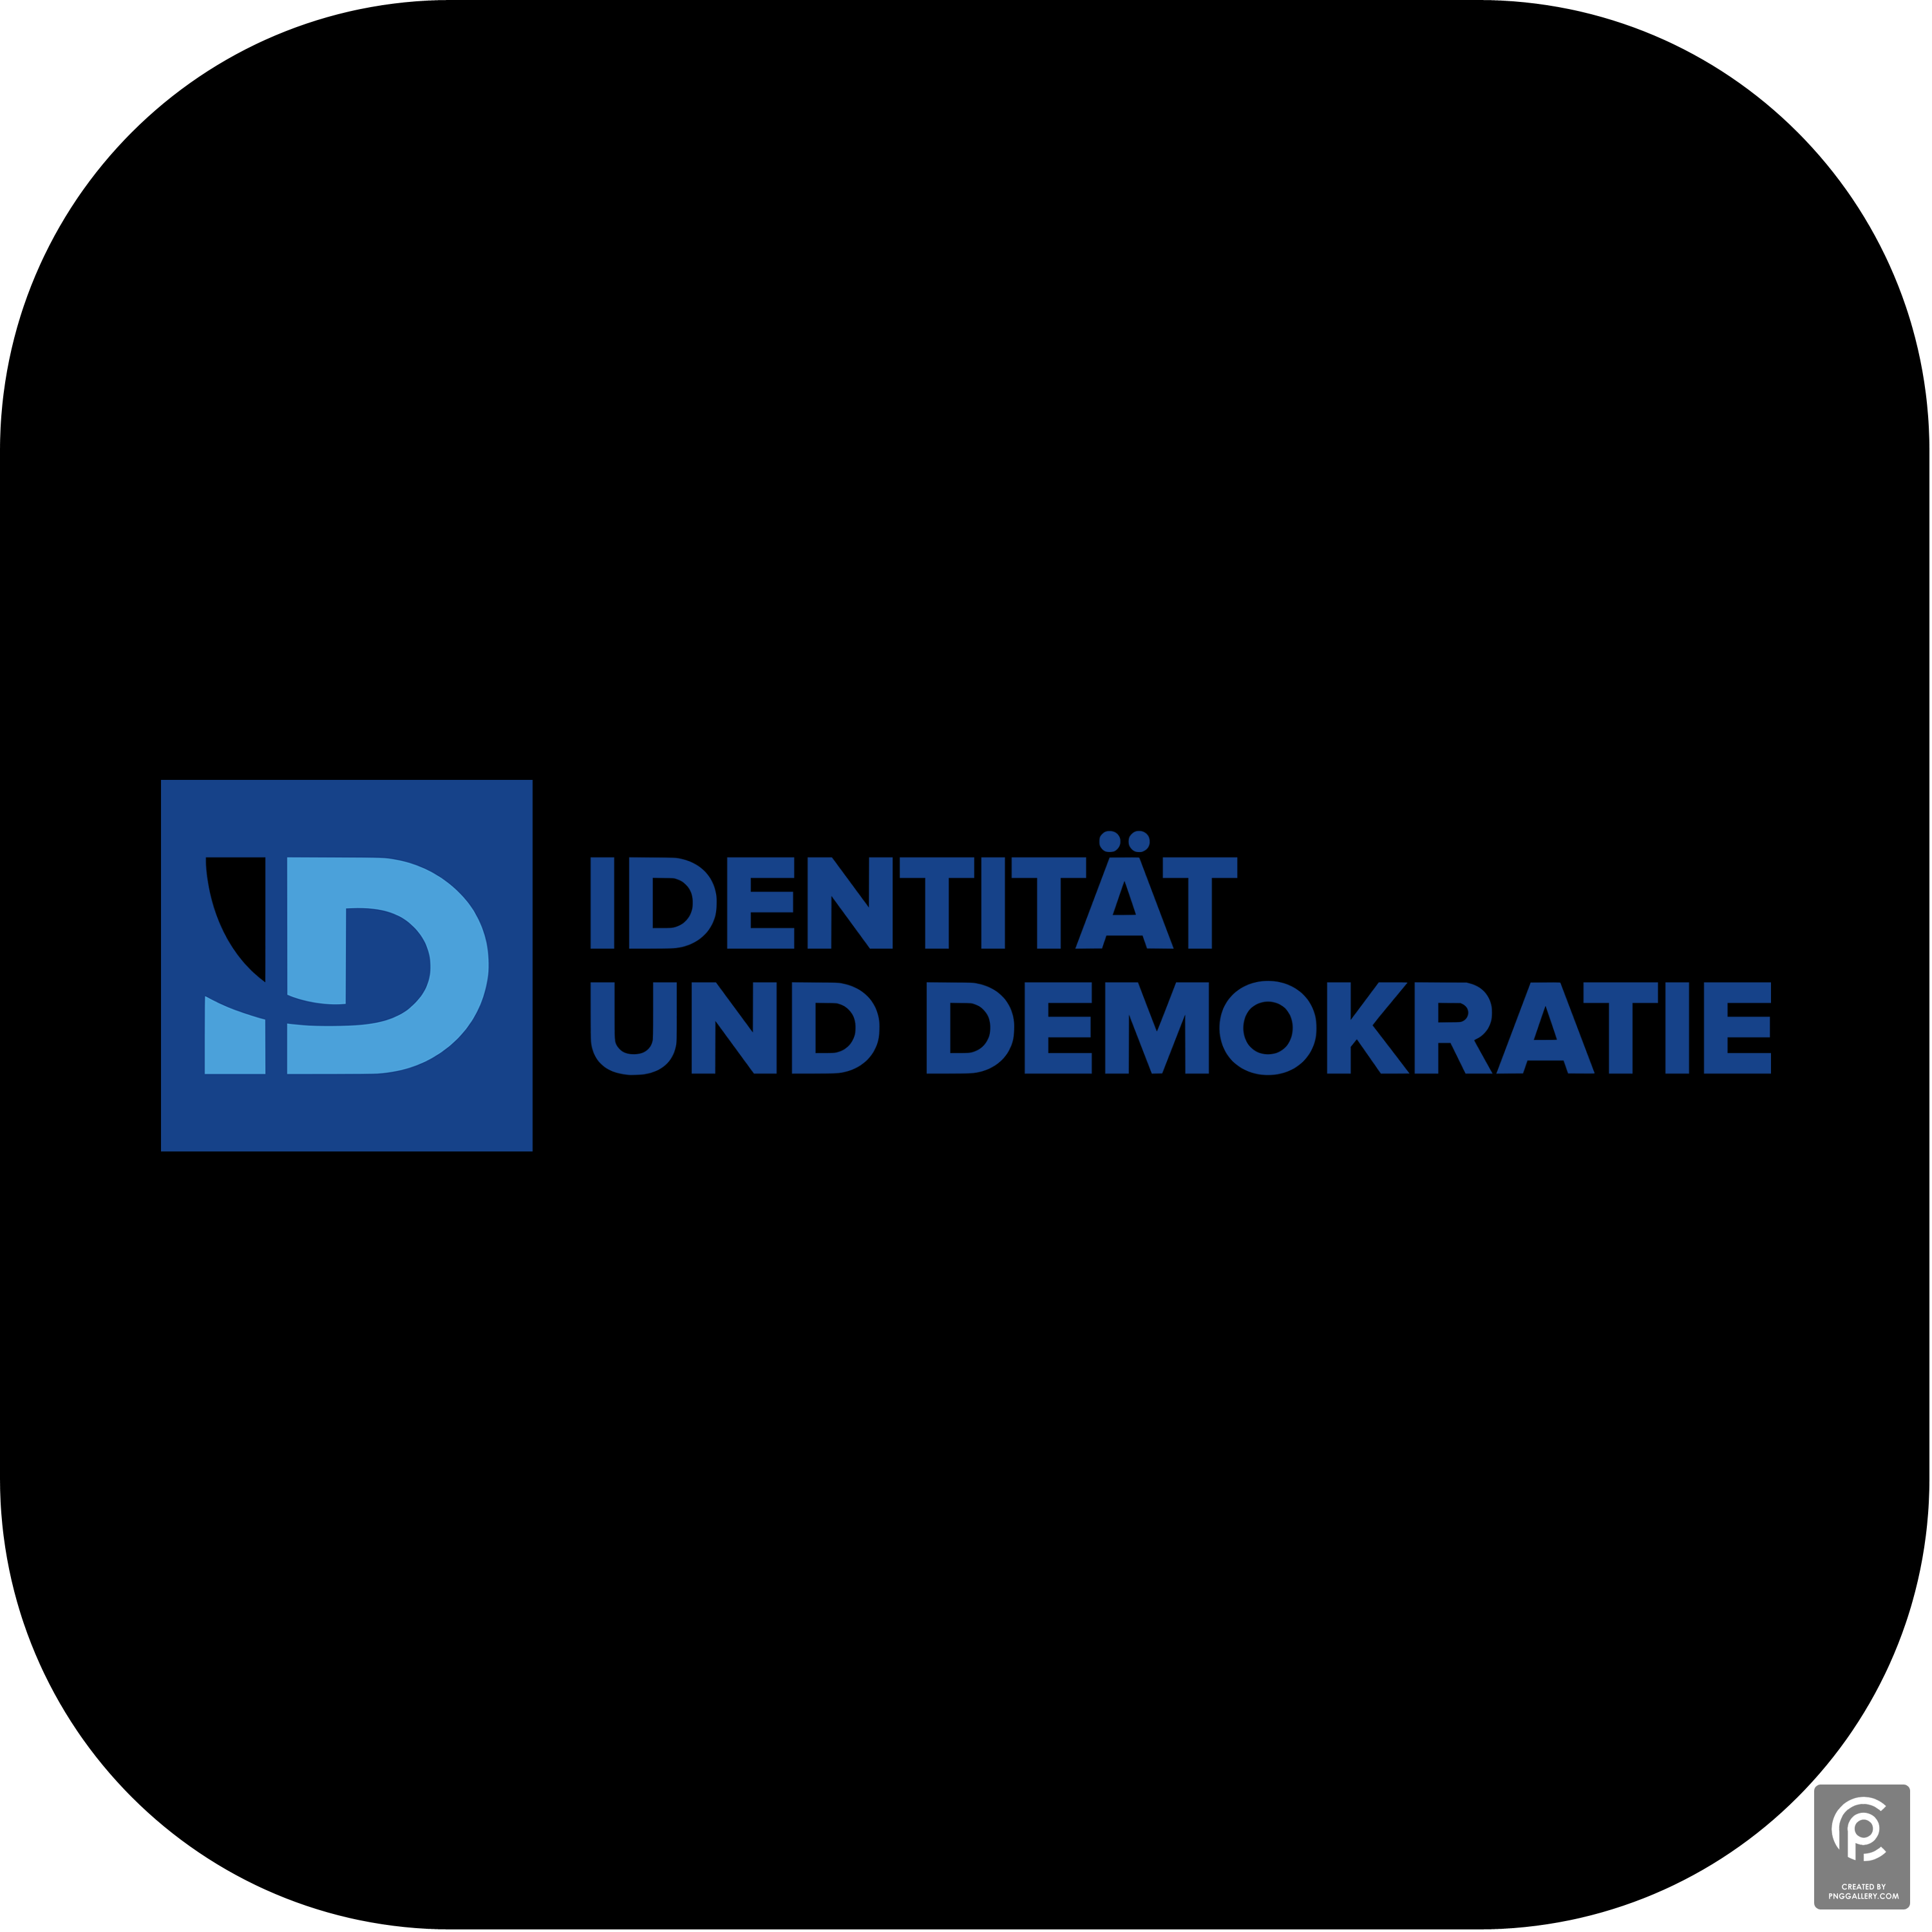 ID Group Ed Logo Transparent Picture